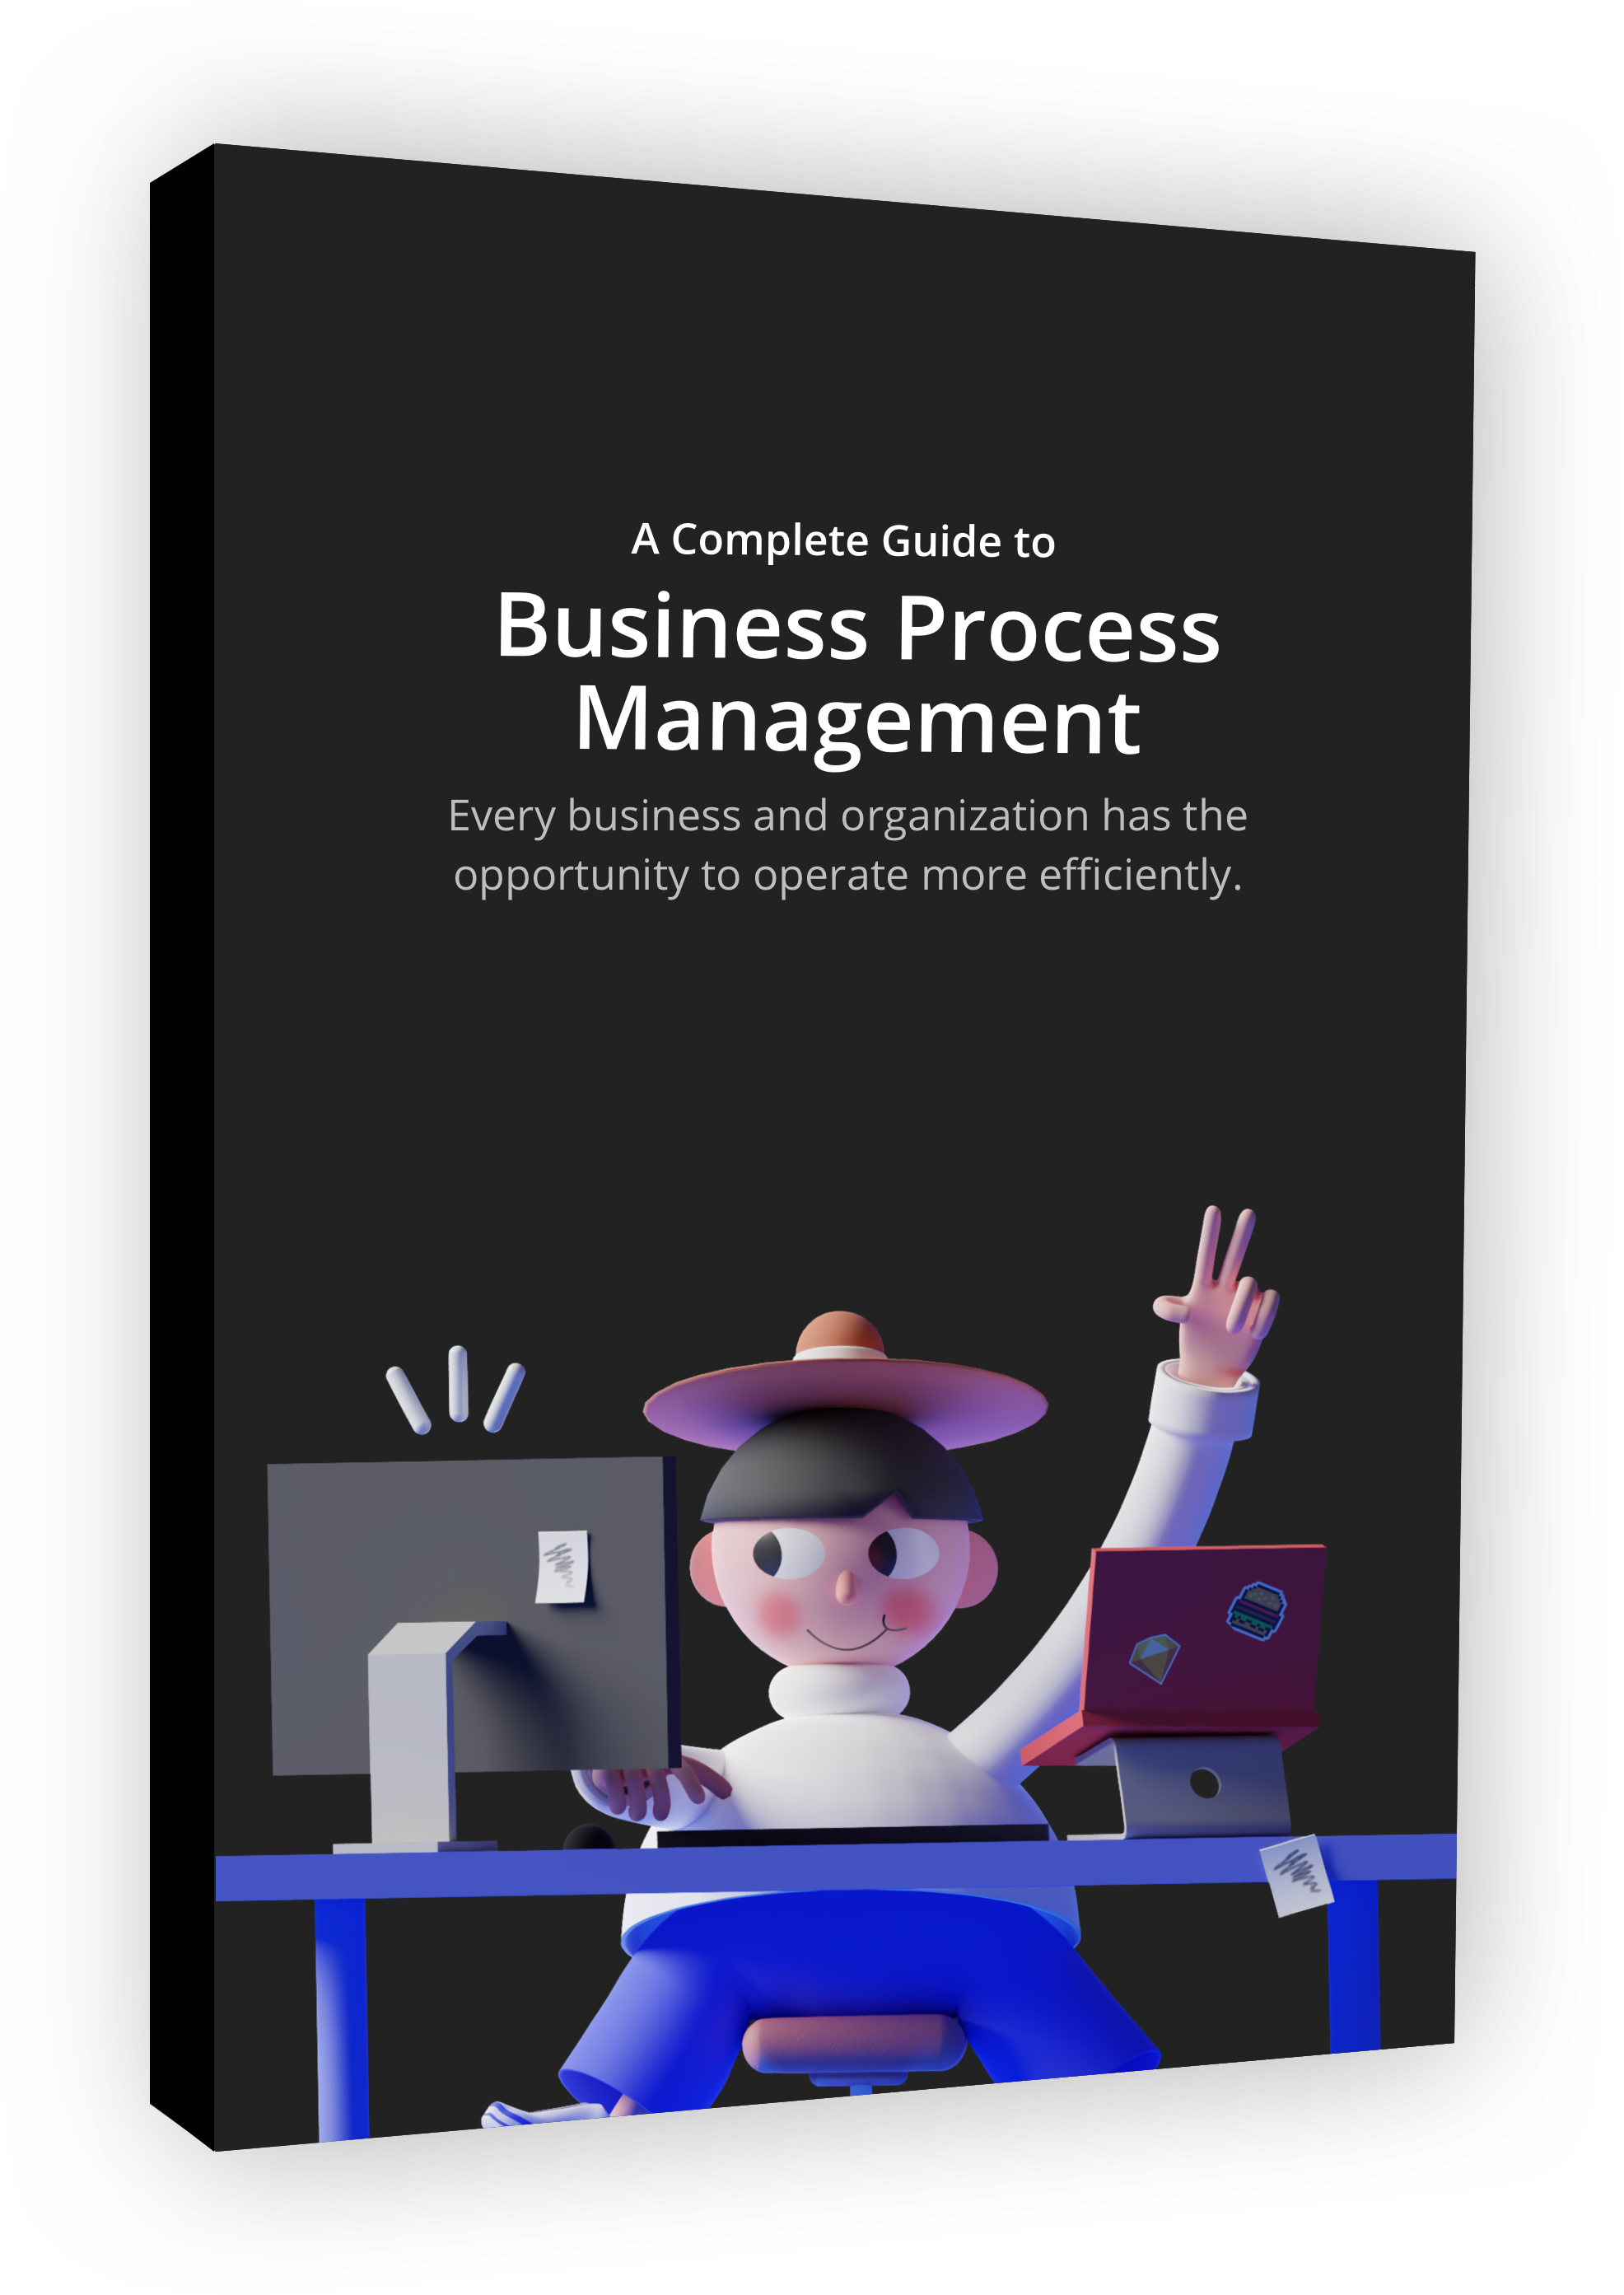 A Complete Guide to Business Process Management